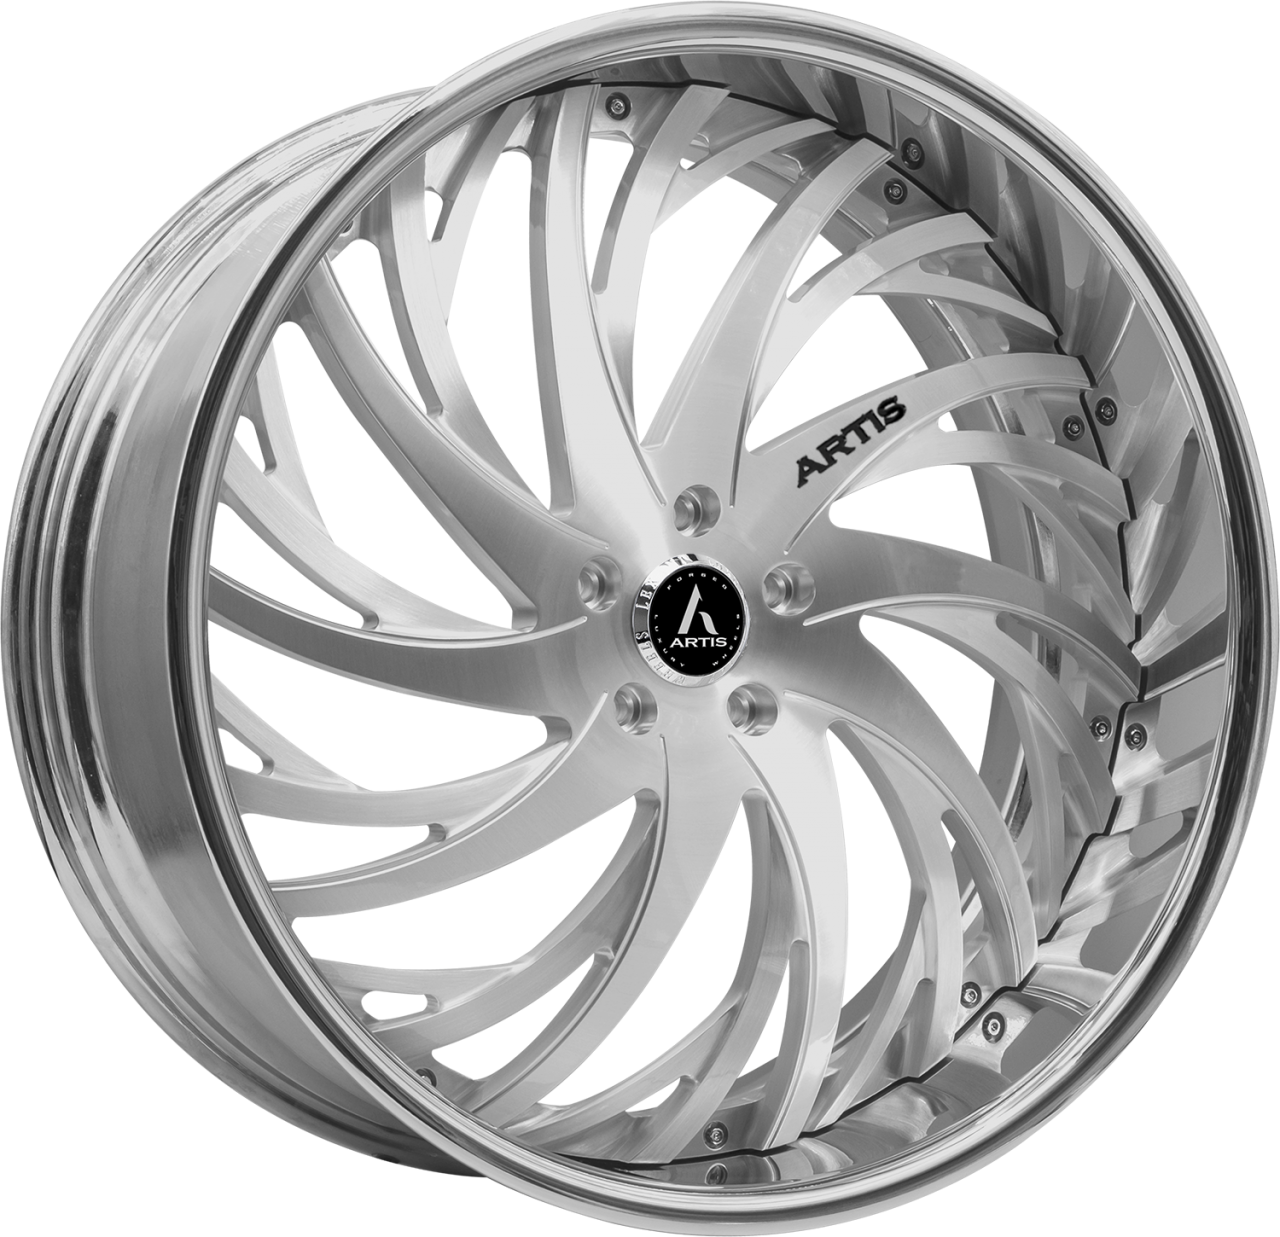 Artis Forged Decatur wheel with Brushed finish